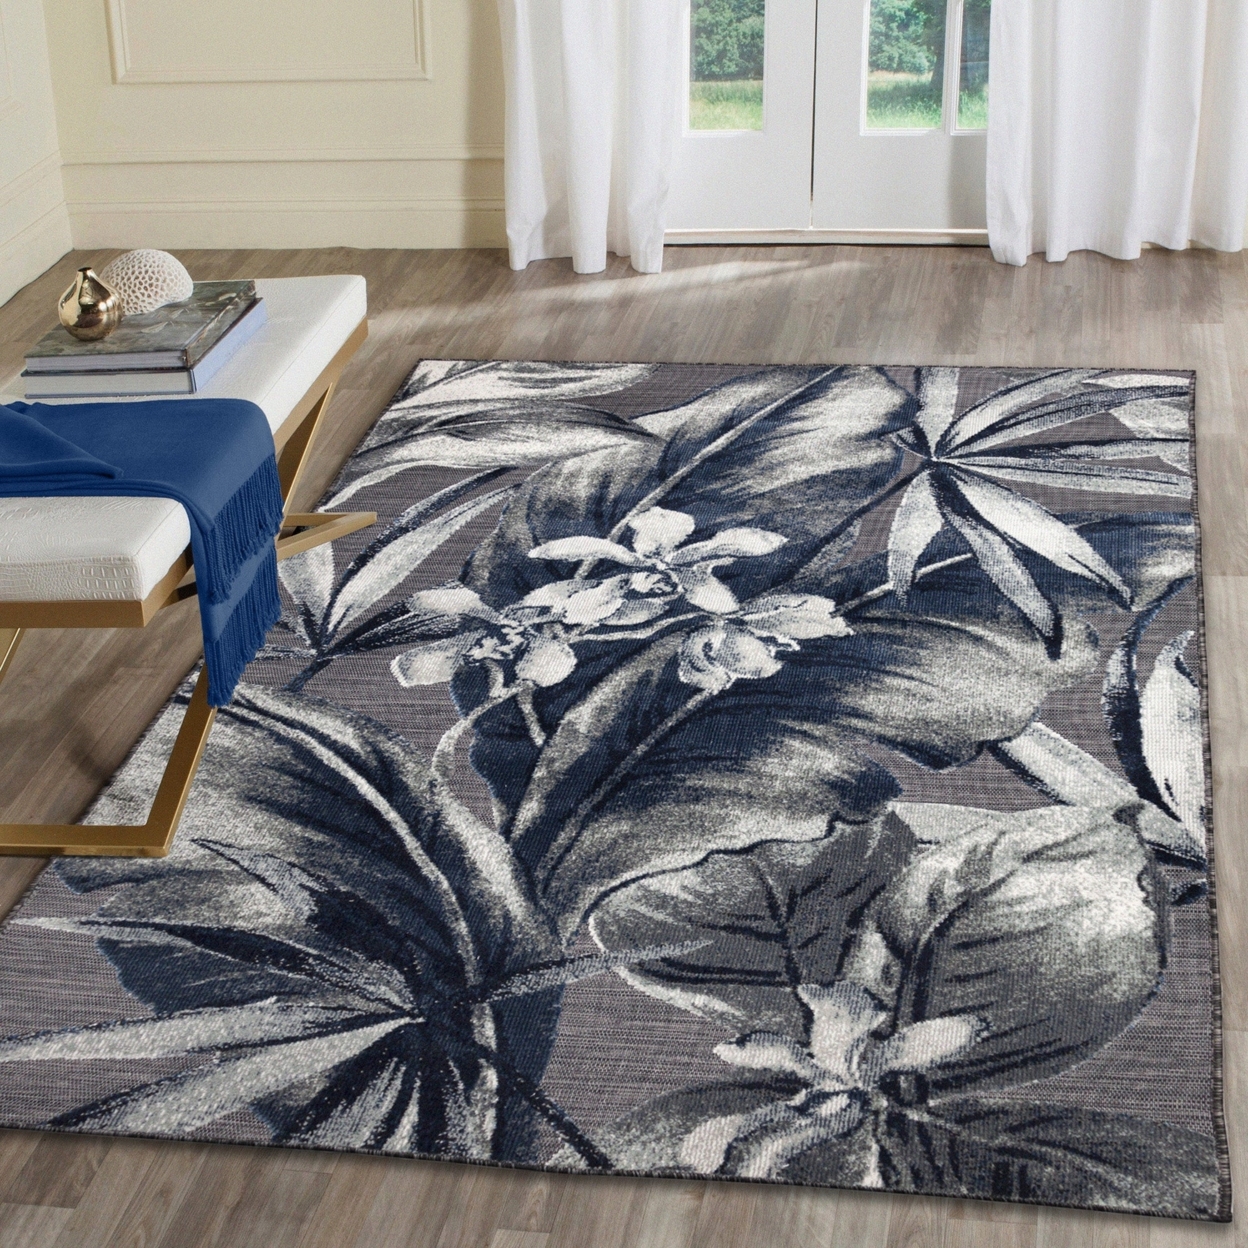 Liora Manne Canyon Tropical Leaf Indoor Outdoor Area Rug Charcoal - 4'9 X 7'6